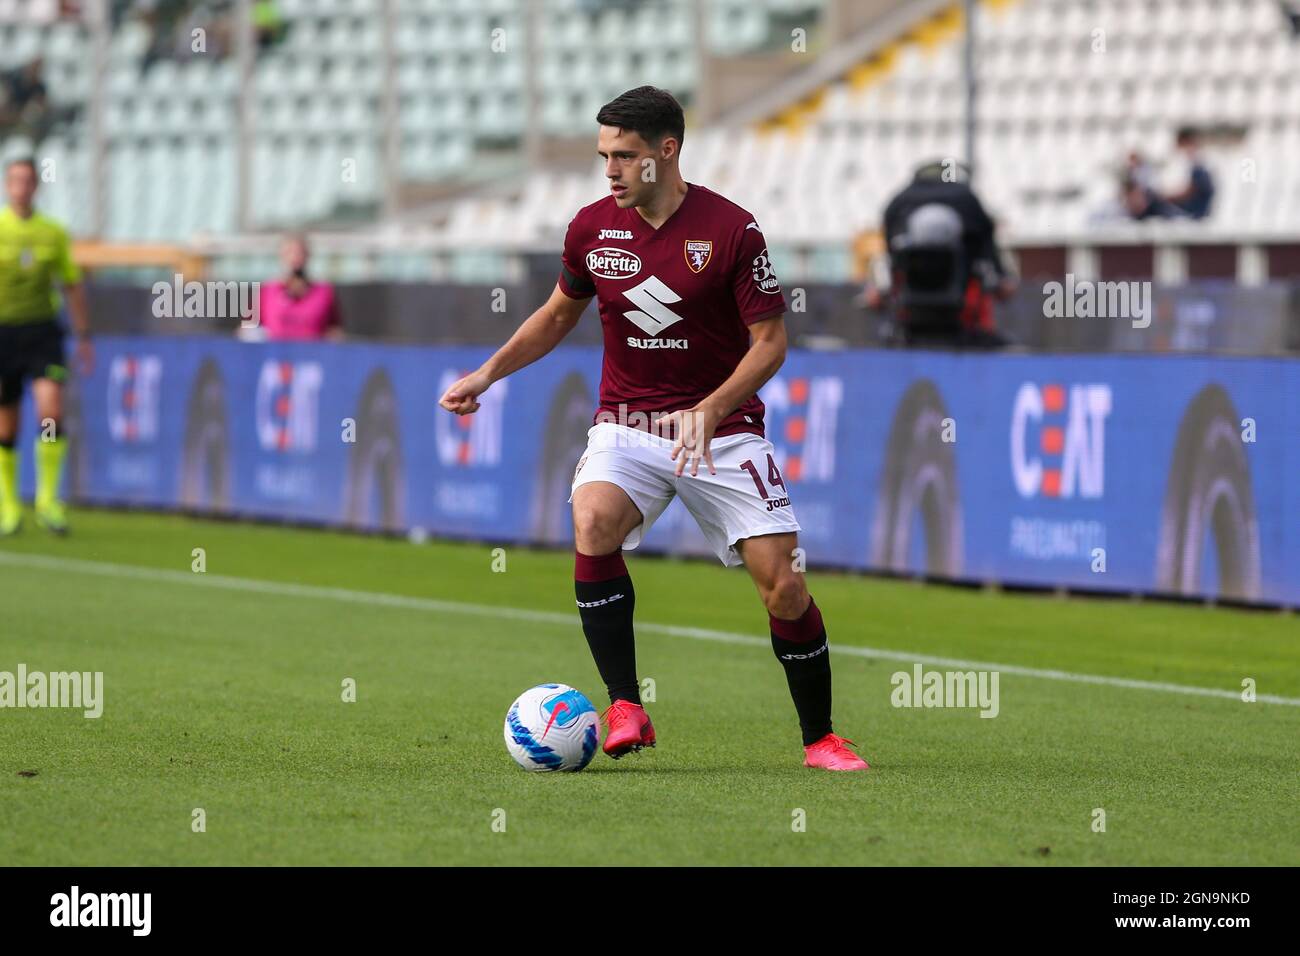 TURIN, ITALY. 23 SEPTEMBER 2021. Josip Brekalo of Torino FC during the Serie A match between Torino FC and SS Lazio BC on 23 September 2021 at Olympic Grande Torino Stadium. Credit: Massimiliano Ferraro/Medialys Images/Alamy Live News Stock Photo